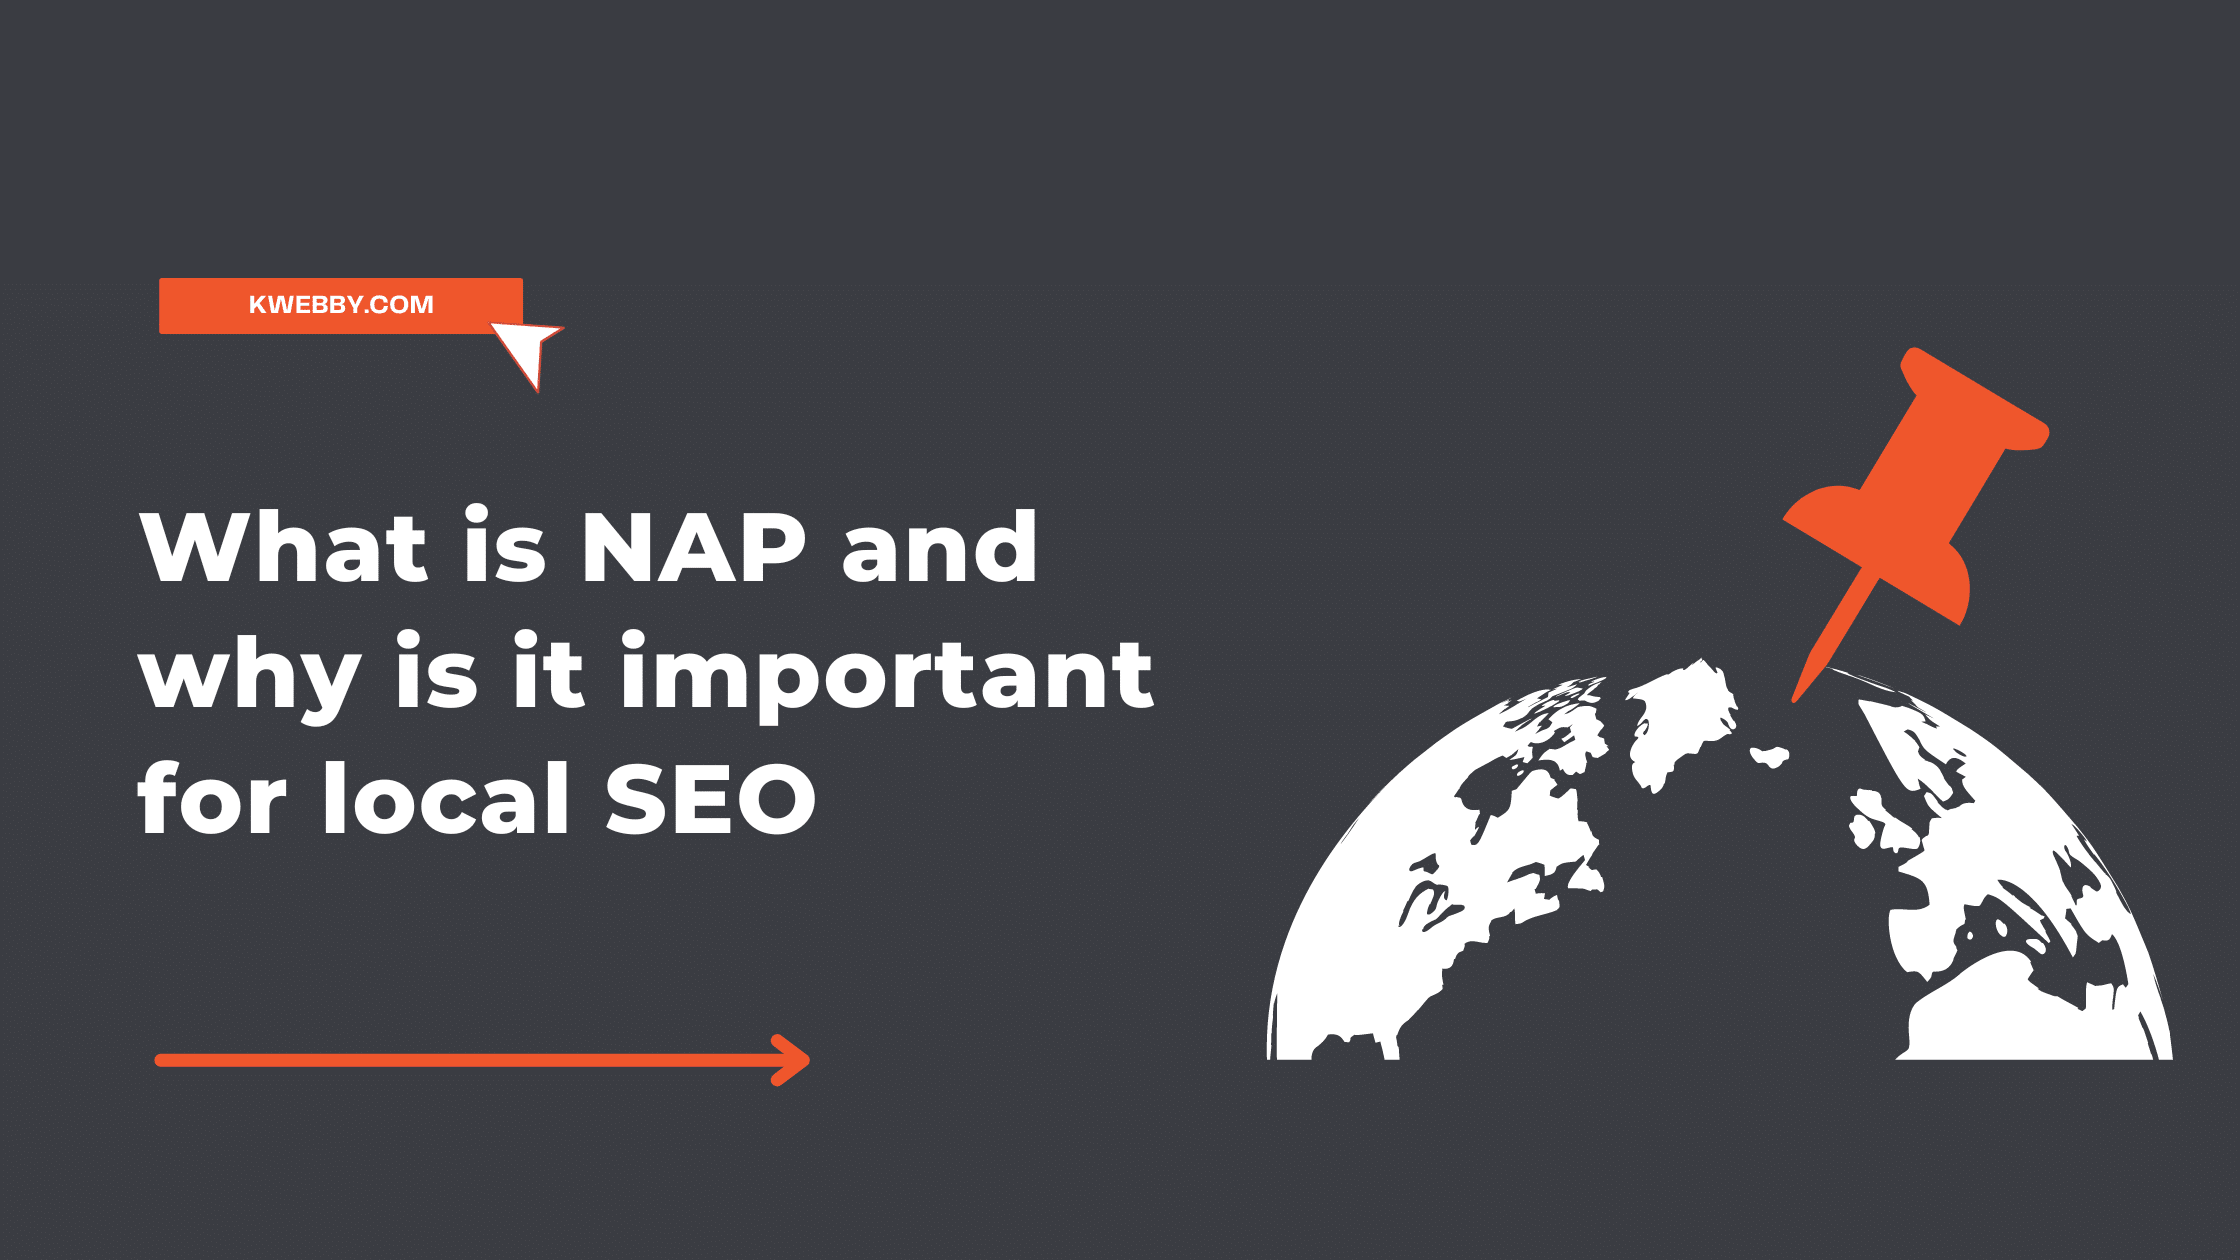 What is NAP and why is it important for local SEO